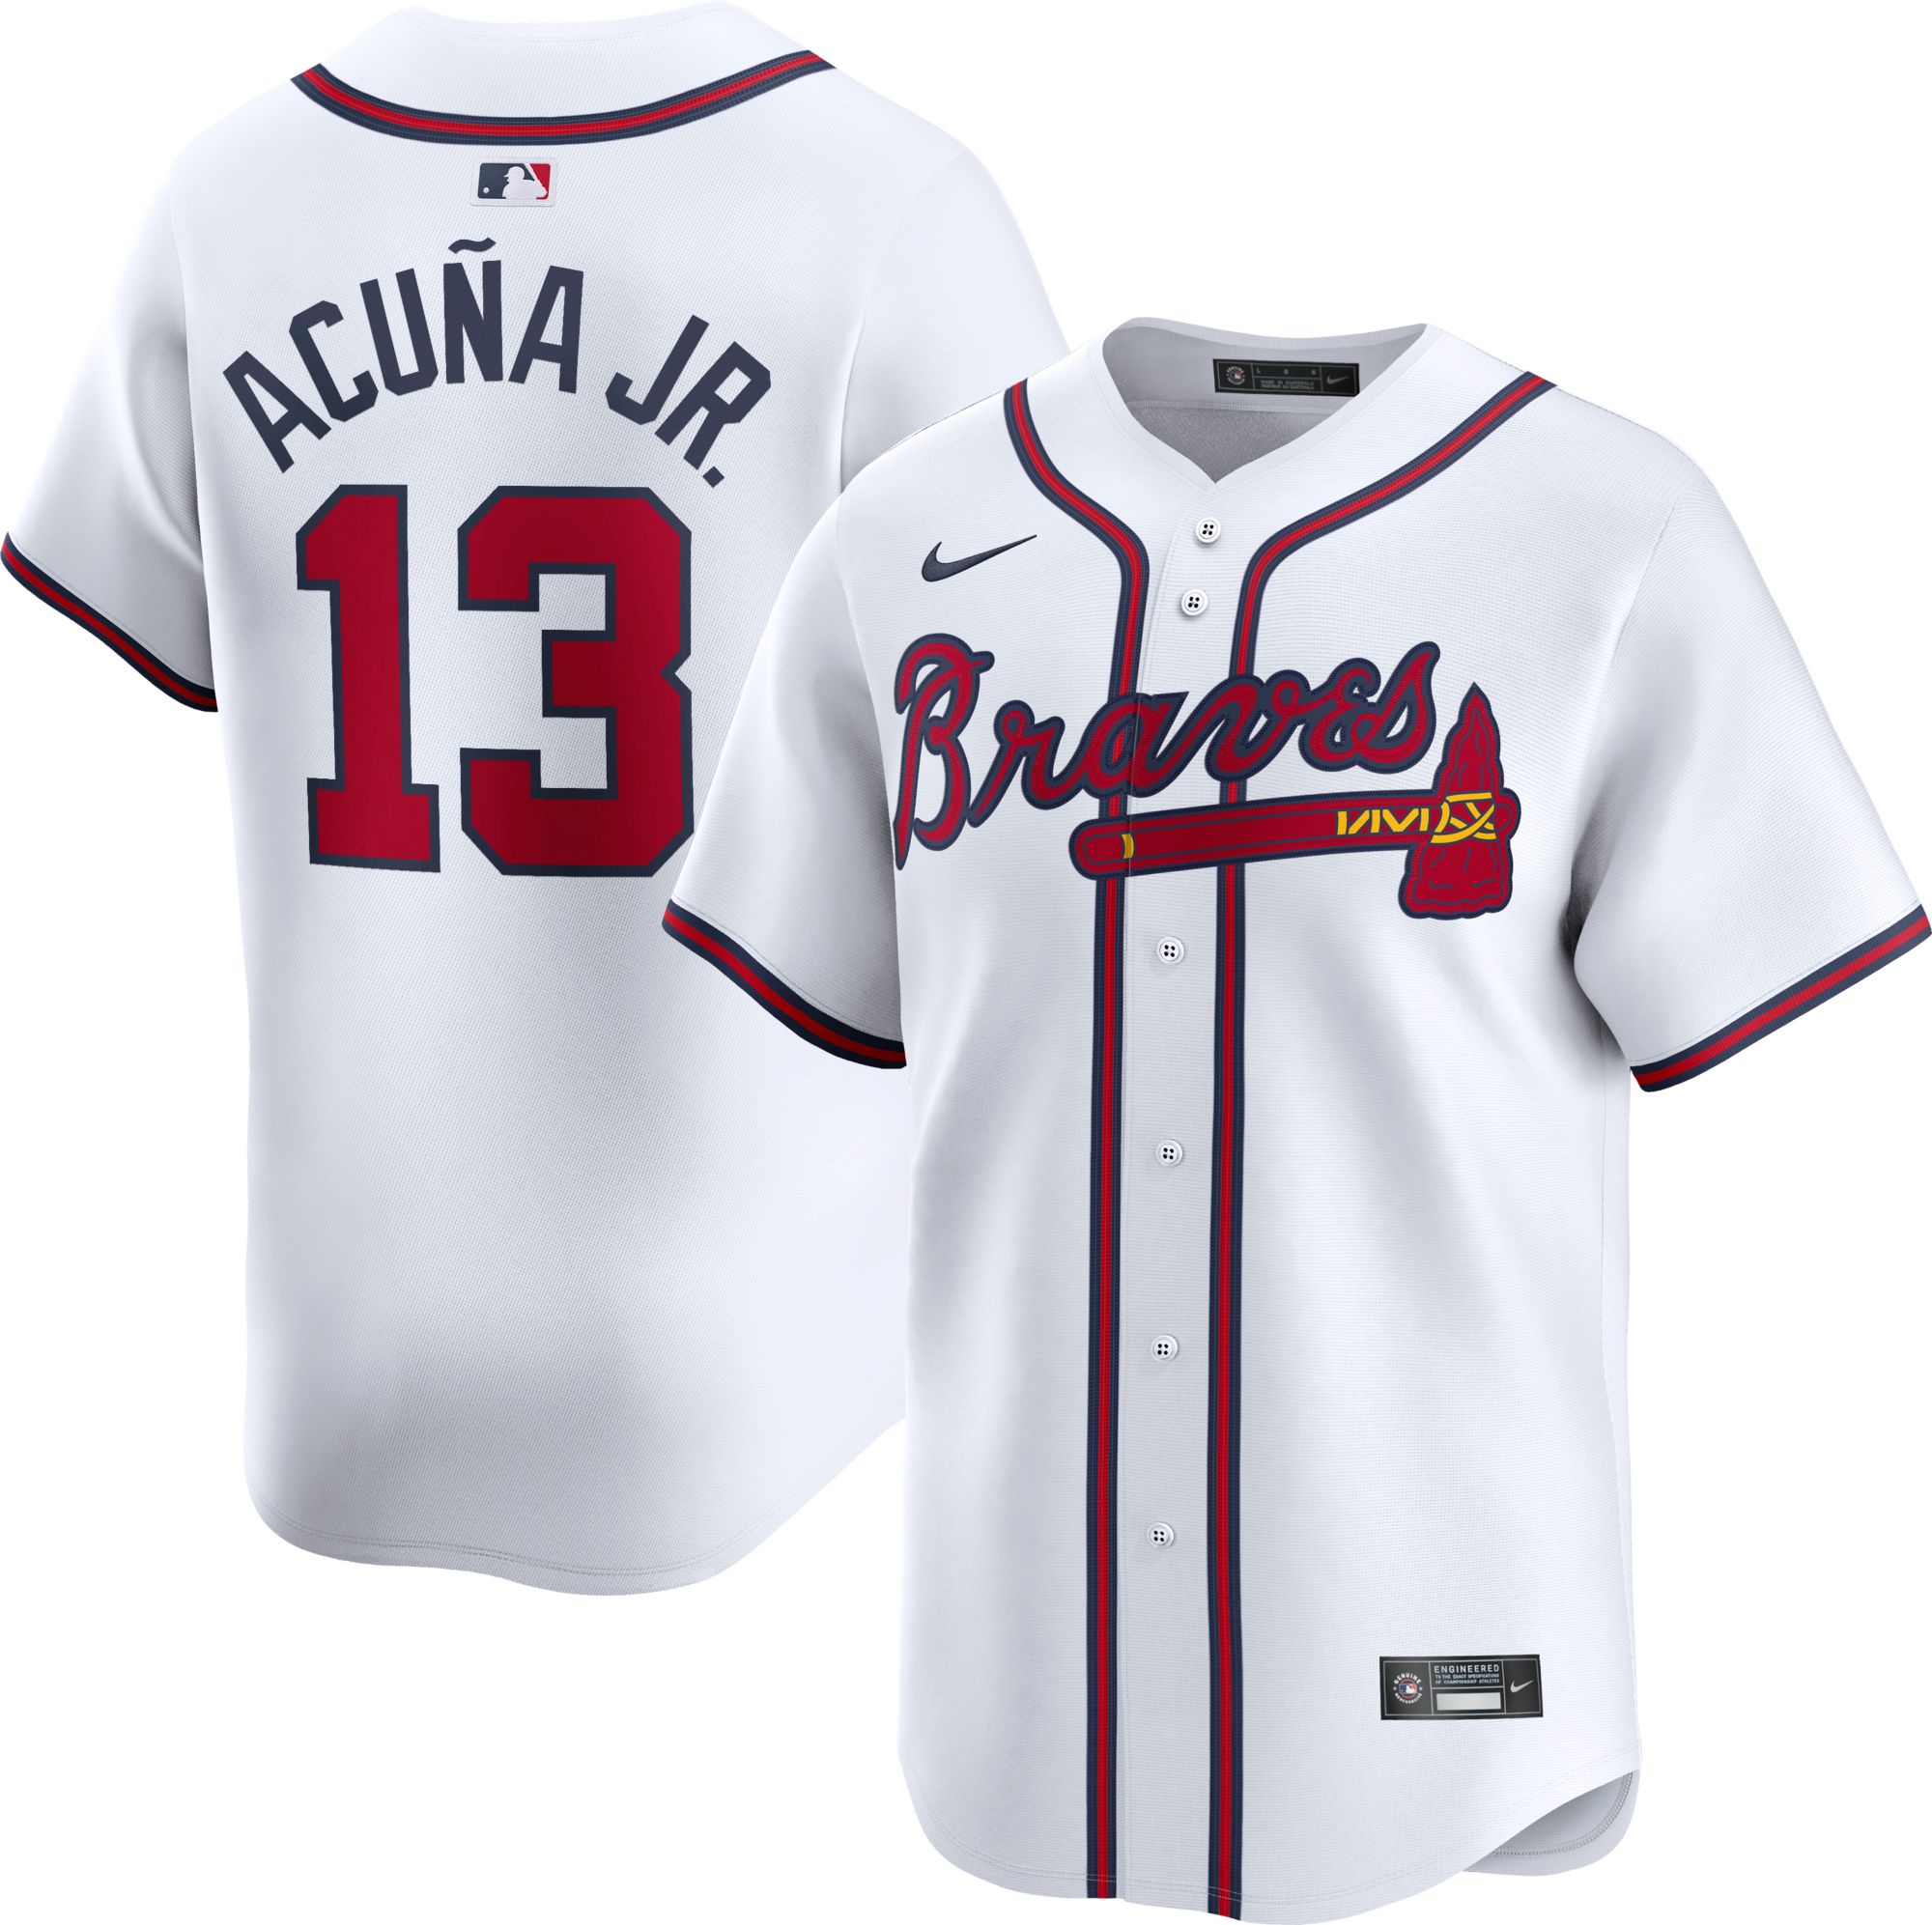 No13 Ronald Acuna Jr. Men's Nike White Fluttering USA Flag Limited Edition Authentic Jersey